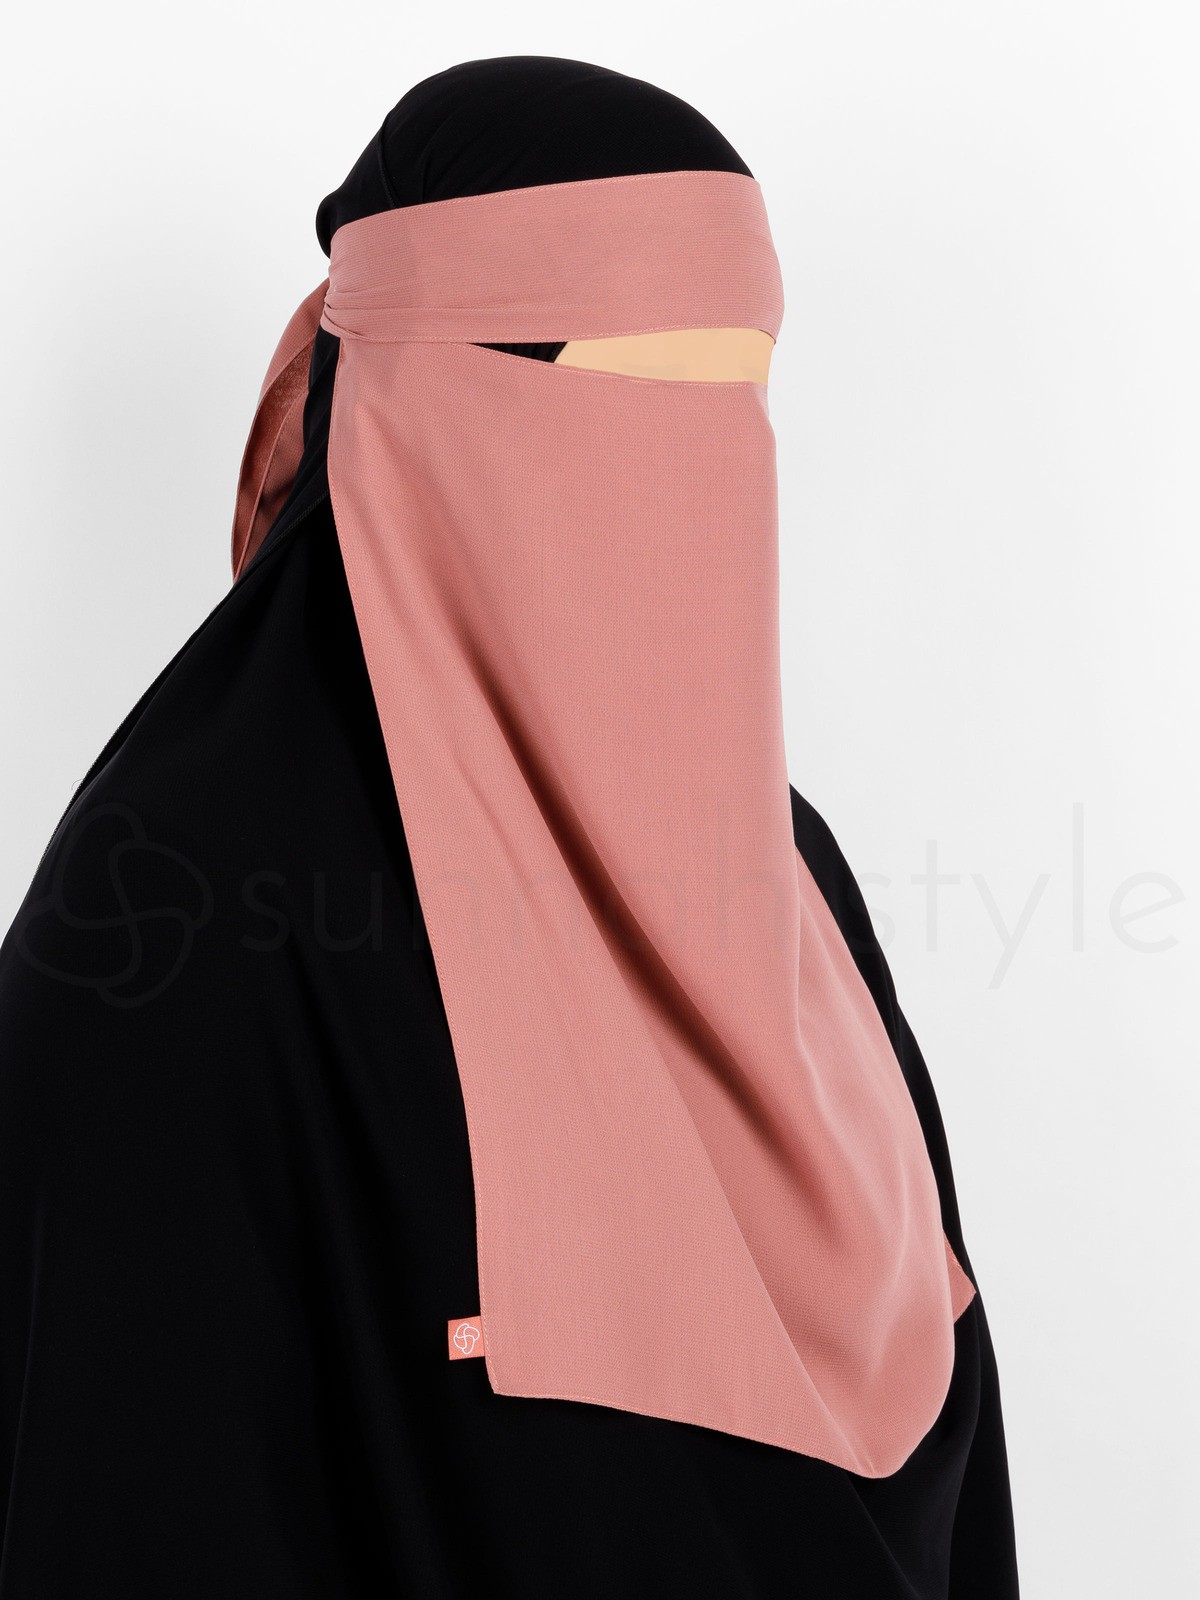 Sunnah Style - Pull-Down One Layer Niqab (Coral)